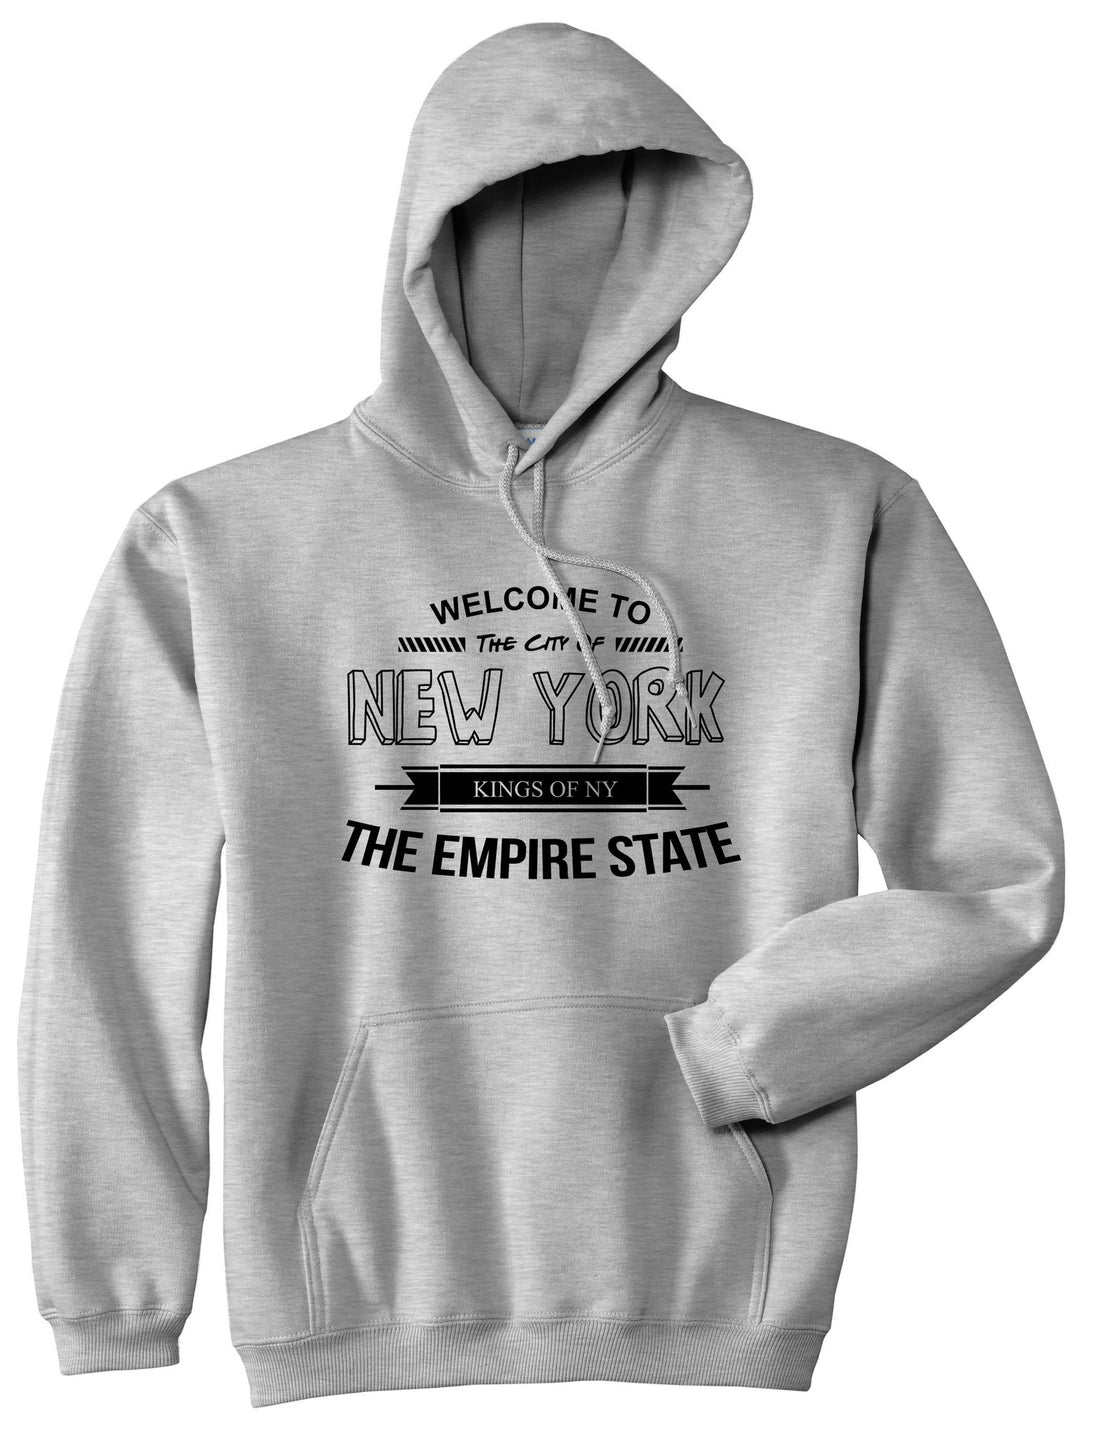 Empire State New York Pullover Hoodie Hoody in Grey by Kings Of NY